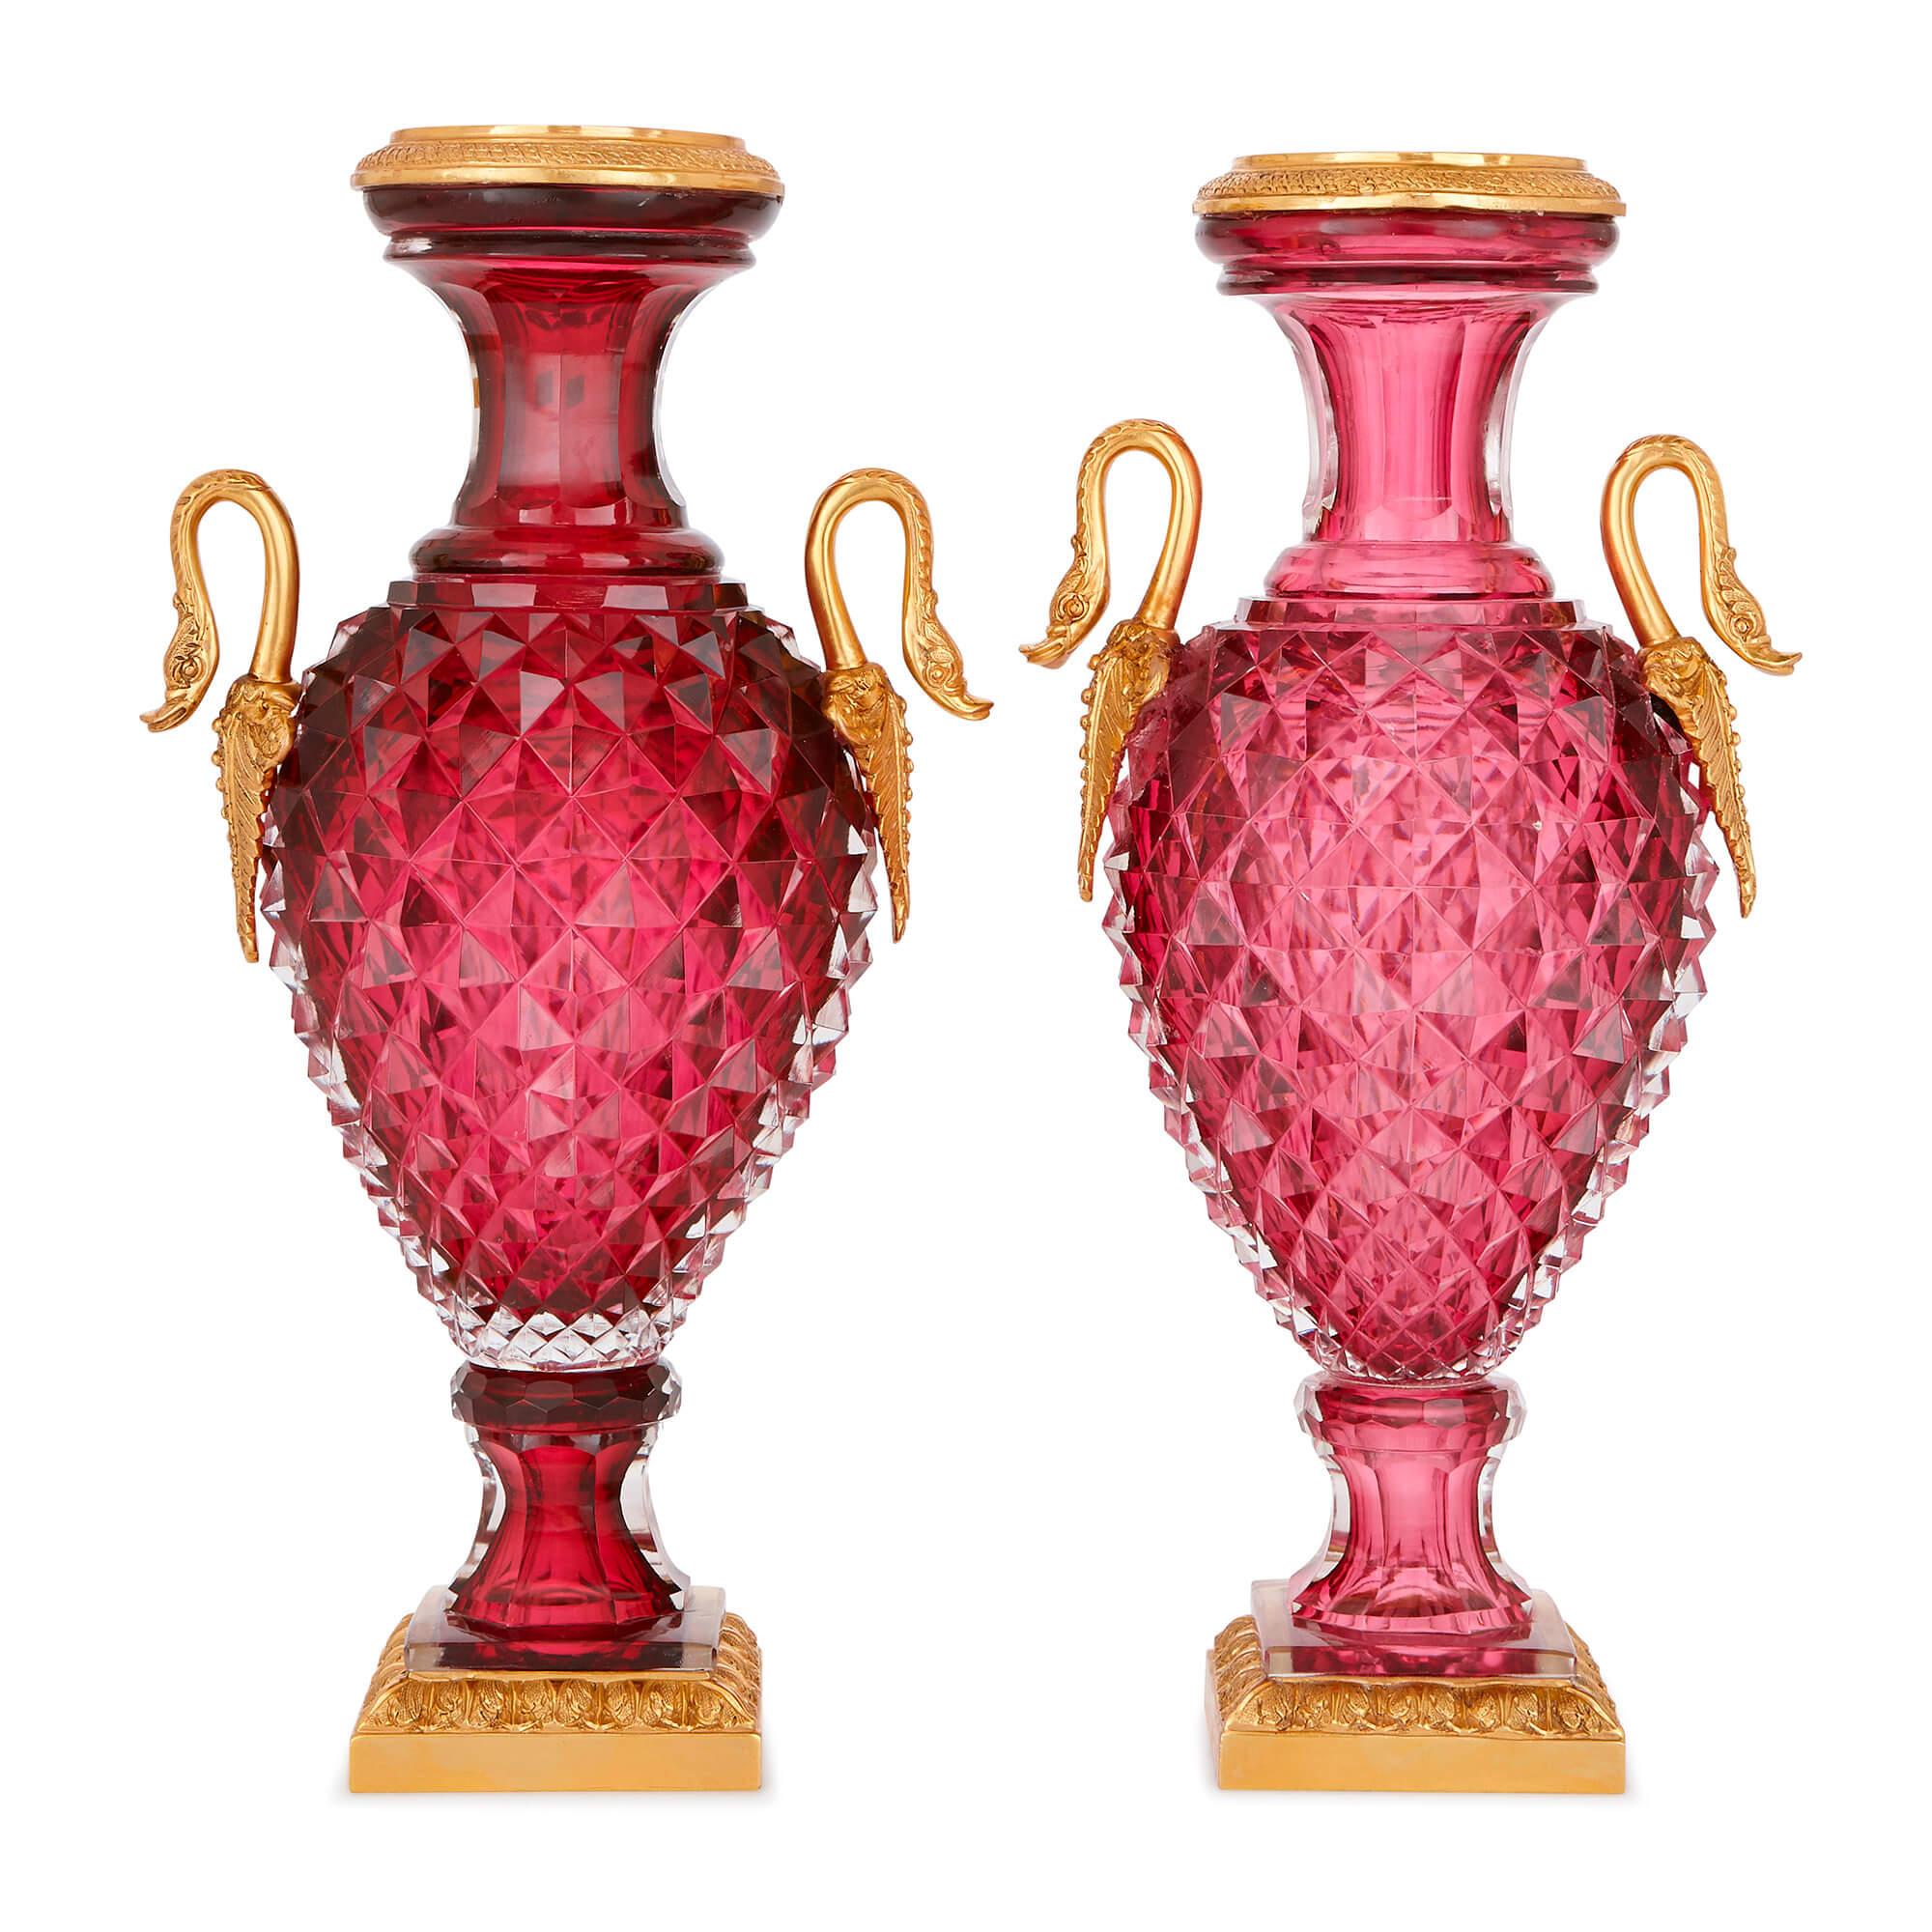 These stunning, jewel-like Russian vases are exceptional examples of the glassmaker's craft. Each one is beautifully built from so-called 'ruby glass', or 'cranberry glass', a distinct type of glass made using large quantities of gold in the